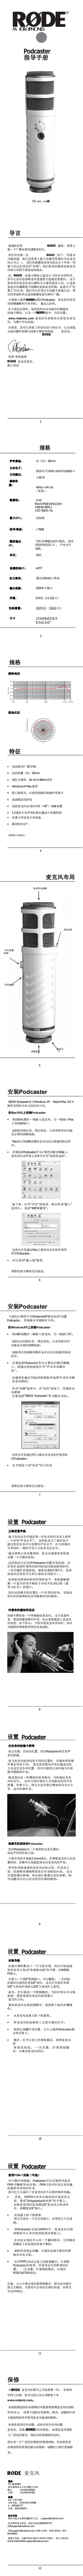 Podcaster_product_manual_1_12_translate_Chinese_0.png